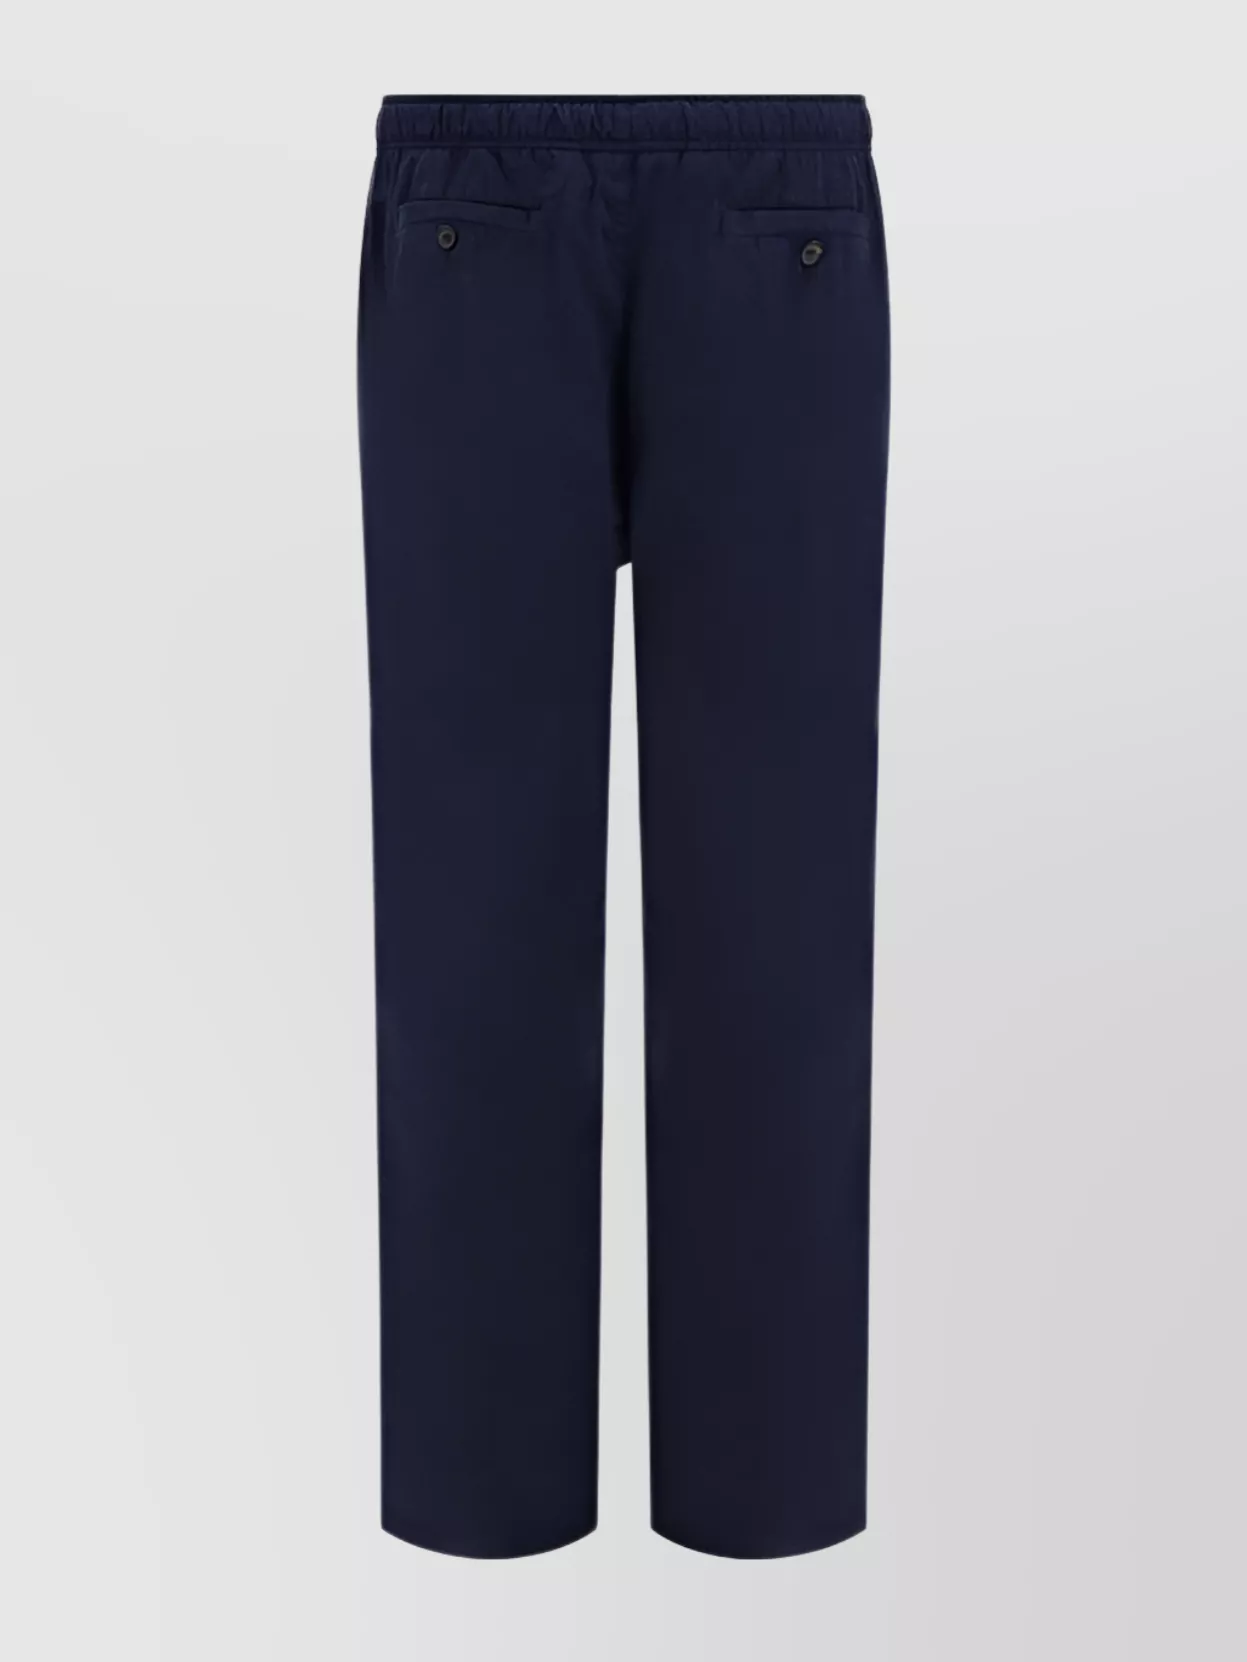 Shop Palm Angels Trousers Featuring Elastic Waistband And Pockets